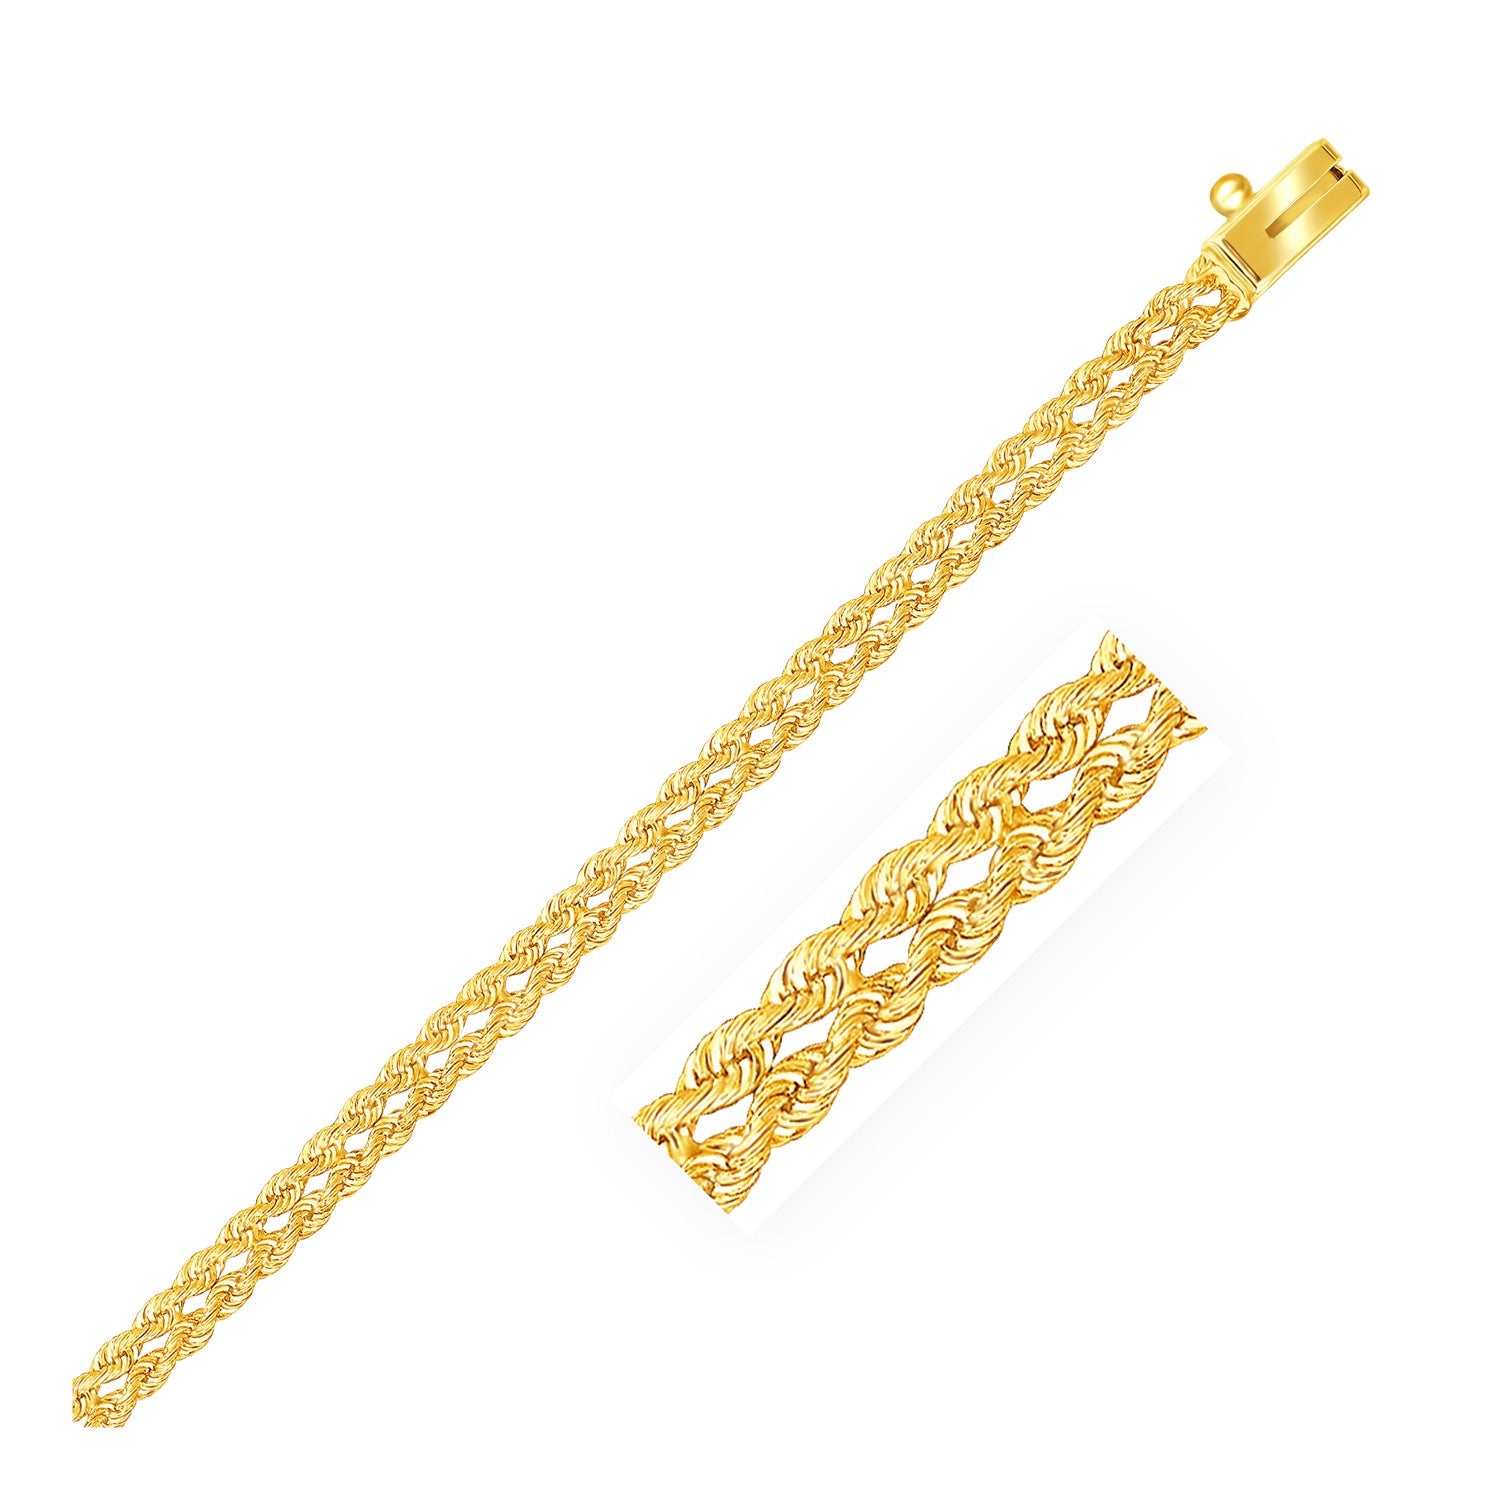 3.0 mm 14k Yellow Gold Two Row Rope Bracelet-0